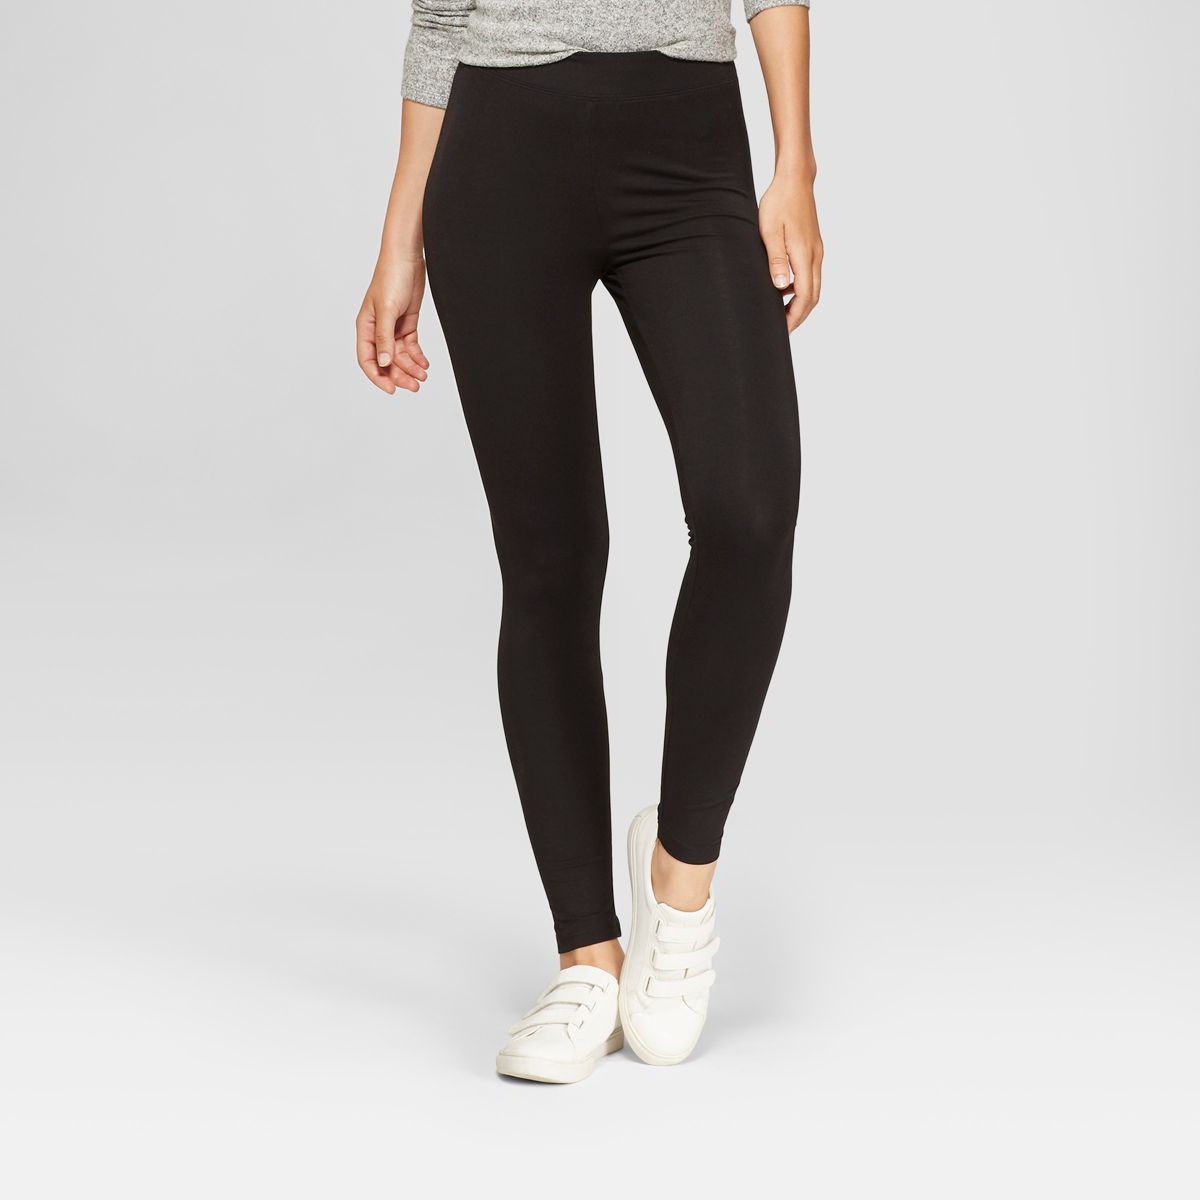 Women's High-Waisted Leggings - A New Day™ | Target